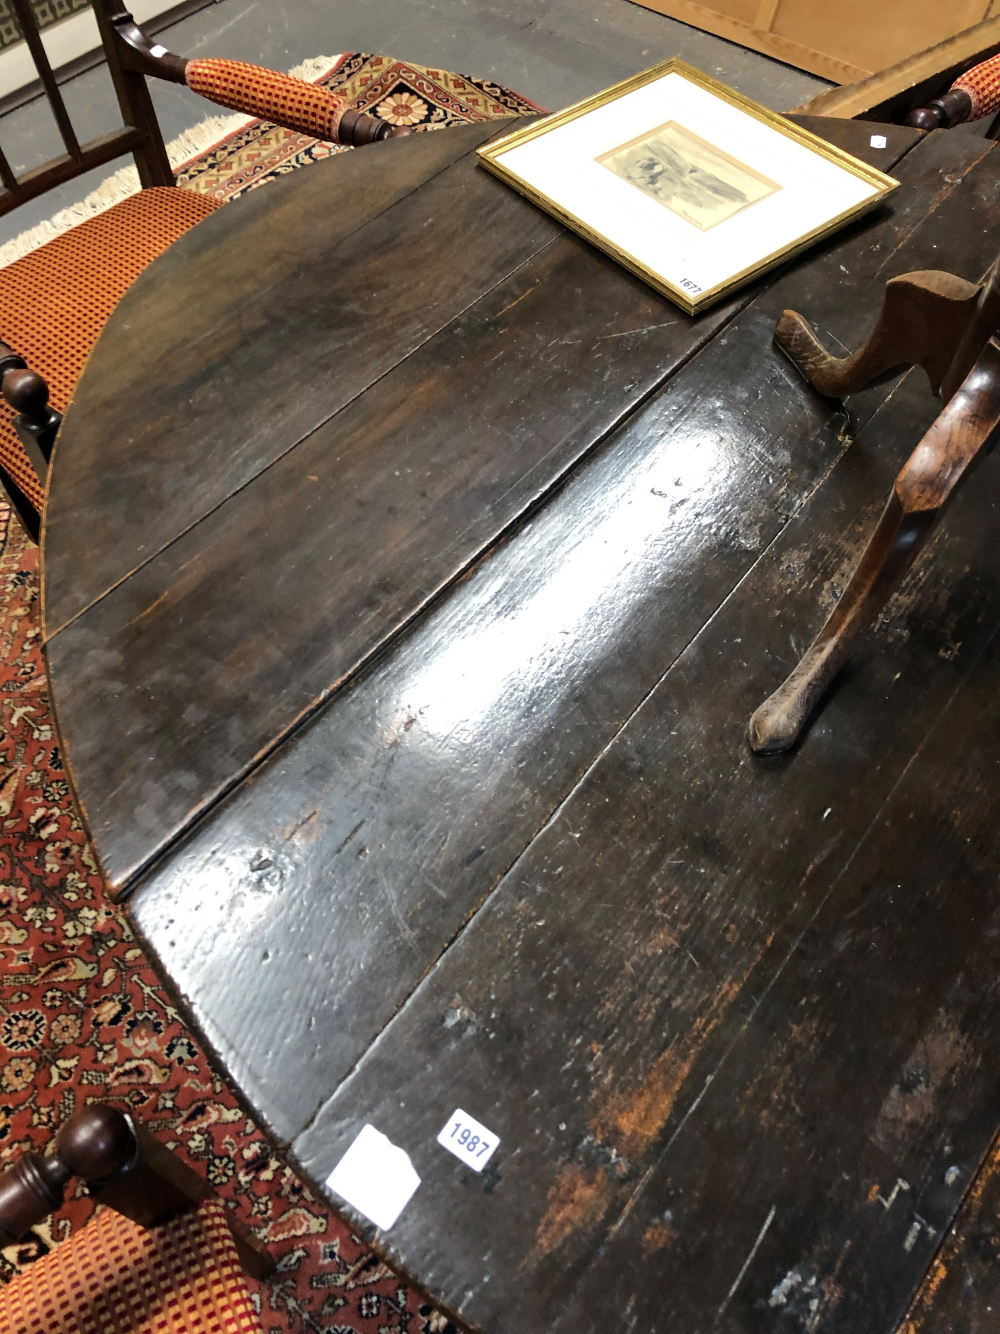 AN EARLY 18th C. OAK OVAL FLAP TOP TABLE, THE BALUSTER LEGS JOINED BY STRETCHERS ABOVE THE BUN FEET. - Image 3 of 4